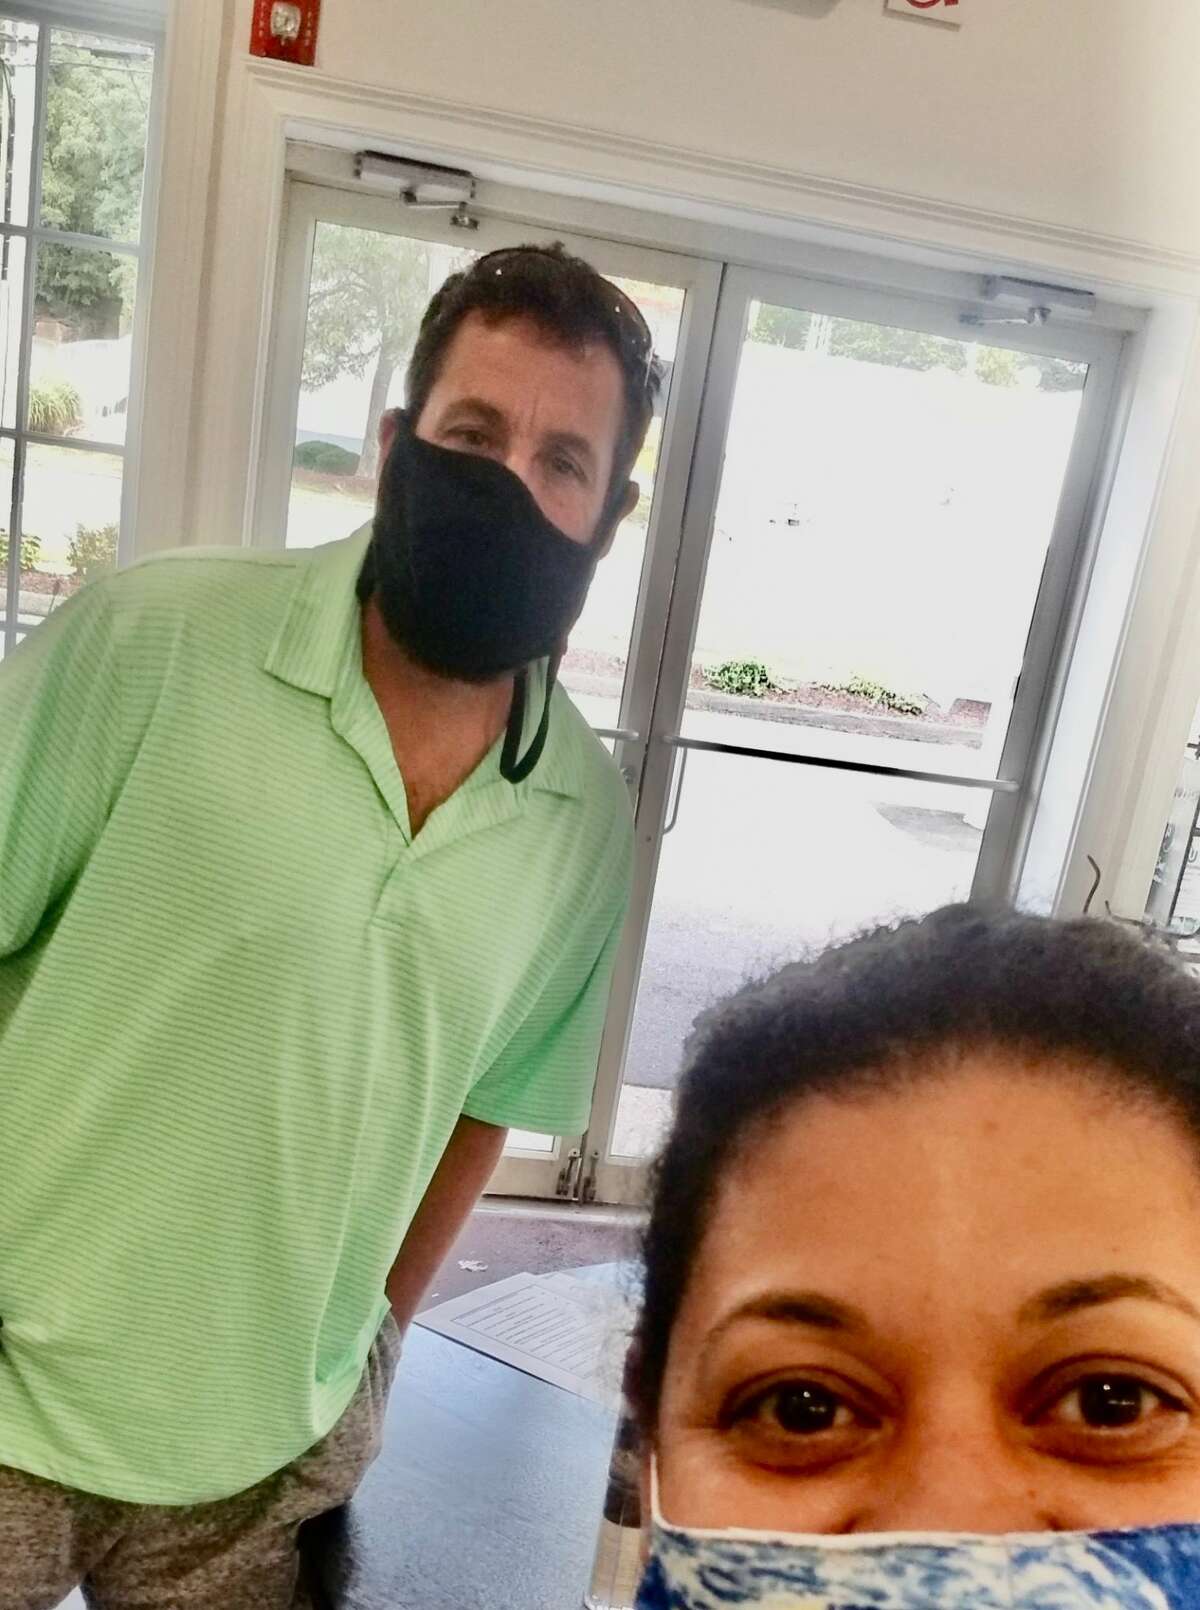 Adam Sandler stopped by Fred 06825 in Fairfield to pick up food on Sept. 28, 2020. Adam Sandler spotted in Fairfield Fred 06825, a deli in Fairfield, had an unexpected customer come in on Sept. 28 - actor Adam Sandler. Sandler was passing through with his parents on his way to Philadelphia and arrived at the deli around 2 p.m. to pick up food, according to owner Fred Kaskowitz. Read more.